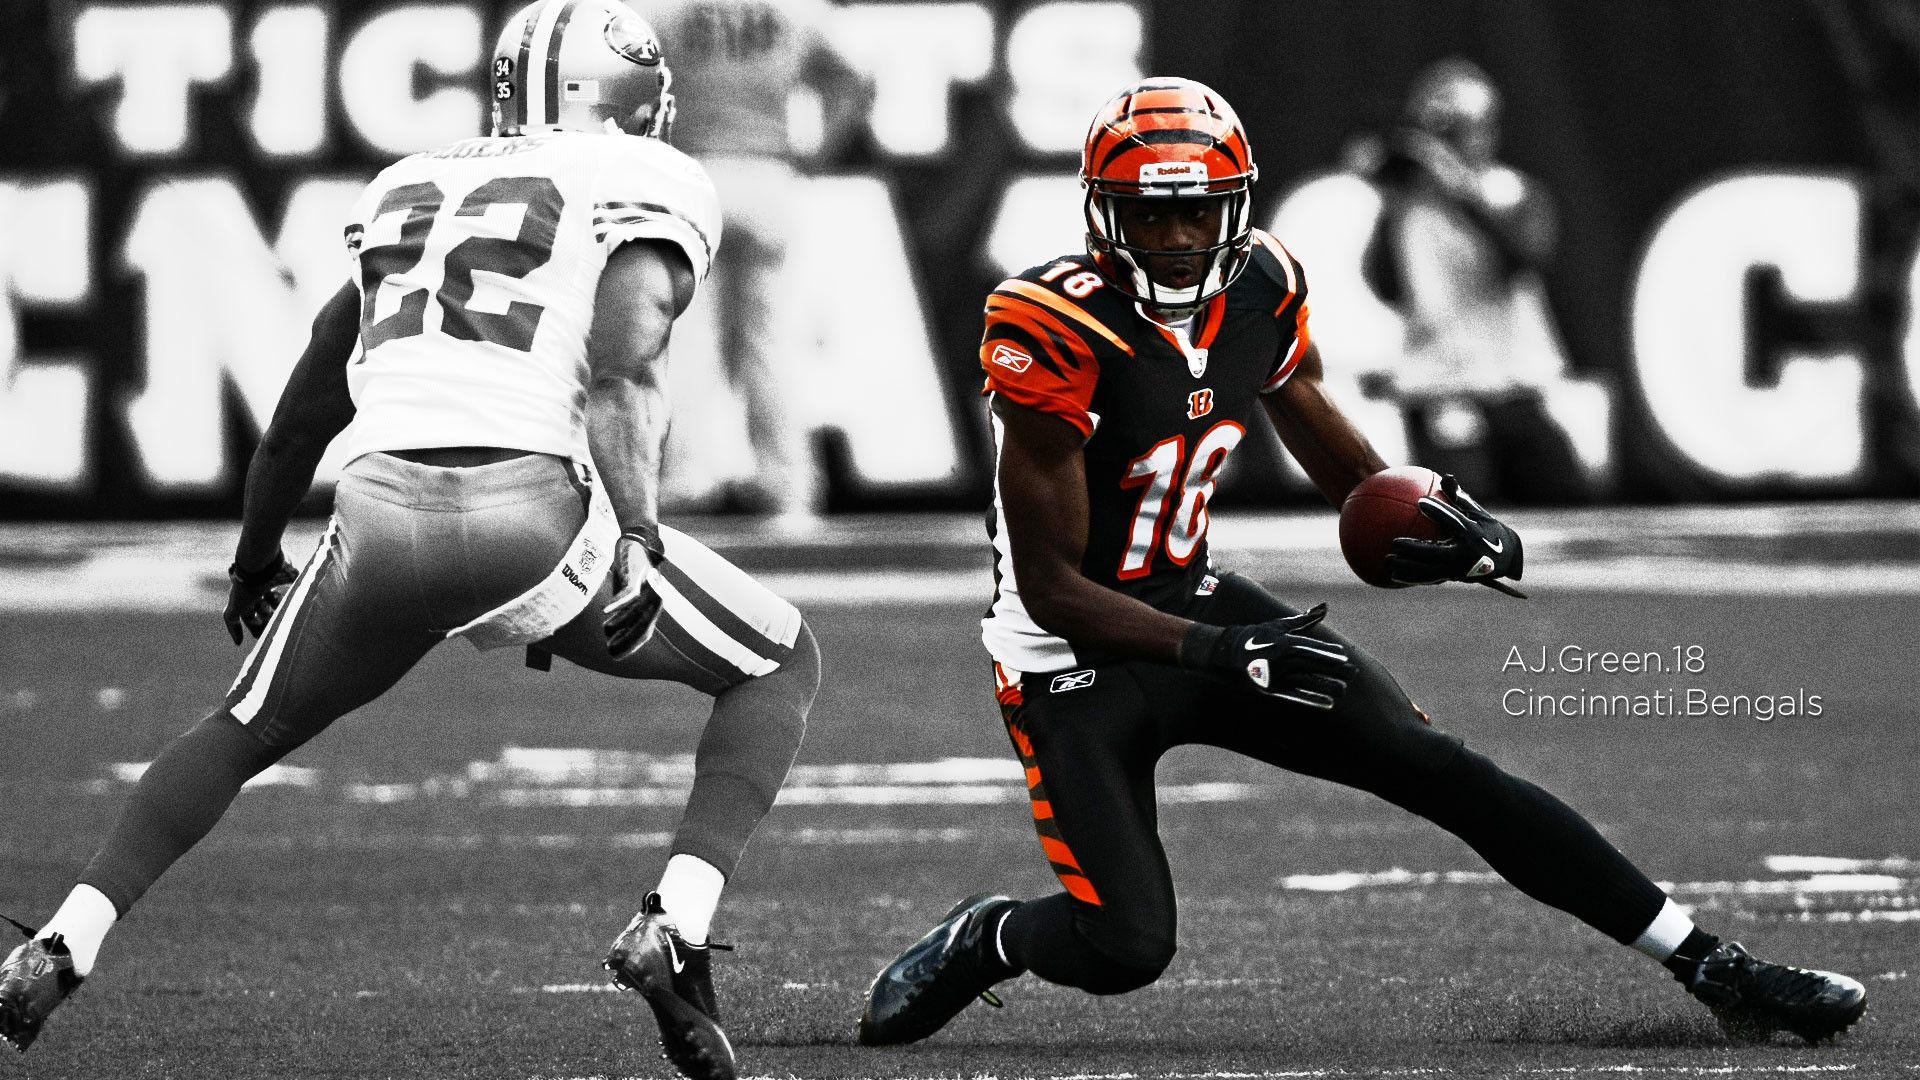 Burrow and Chase Wallpaper I made  rbengals